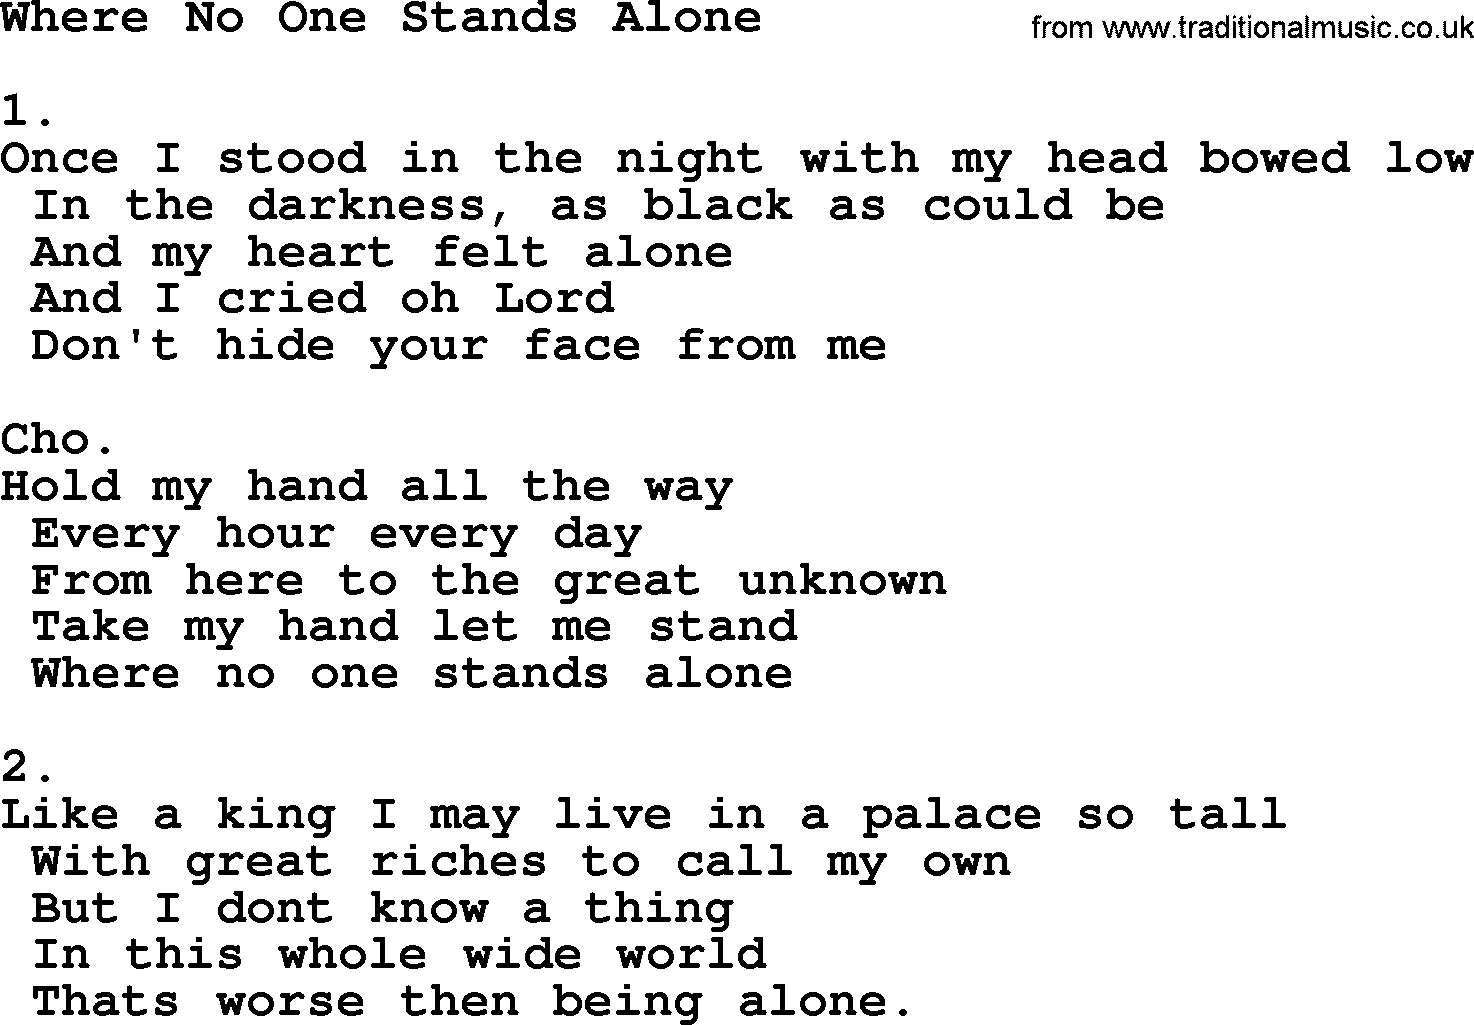 Apostolic & Pentecostal Hymns and Songs, Hymn: Where No One Stands Alone lyrics and PDF